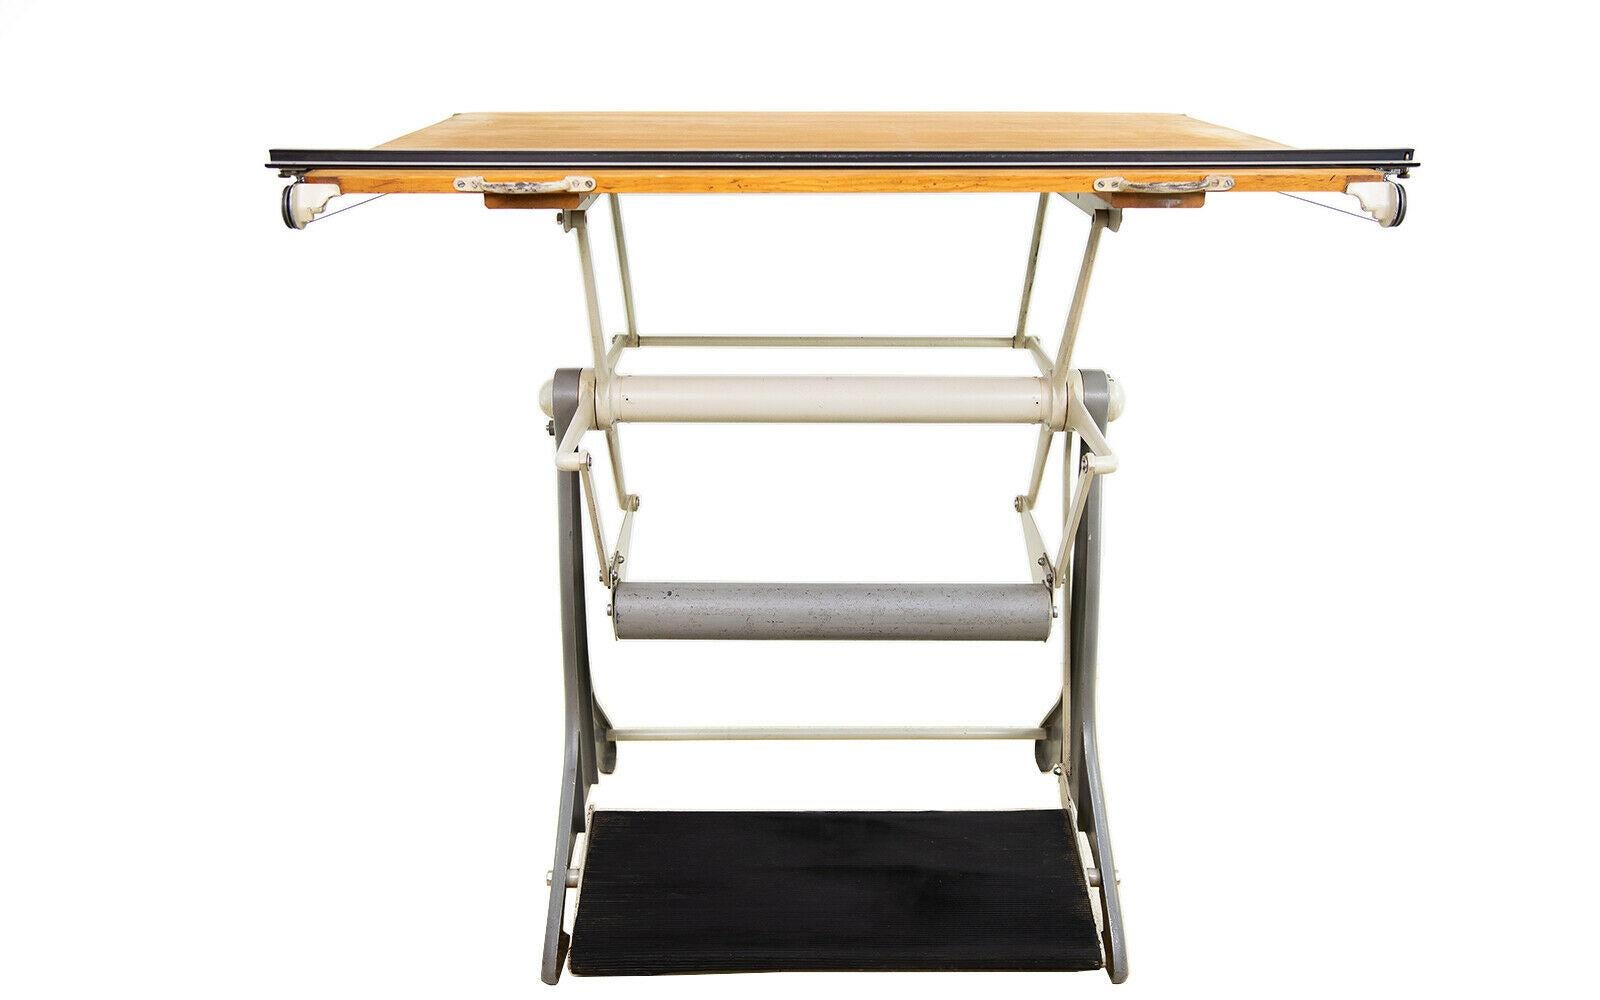 Architects table 

An Admel adjustable draughtsman's table/drawing board.

This mid-century British made draughtsman's table features a tilt table above a solid metal frame.

The top can be tilted, lifted and secured as you wish using the